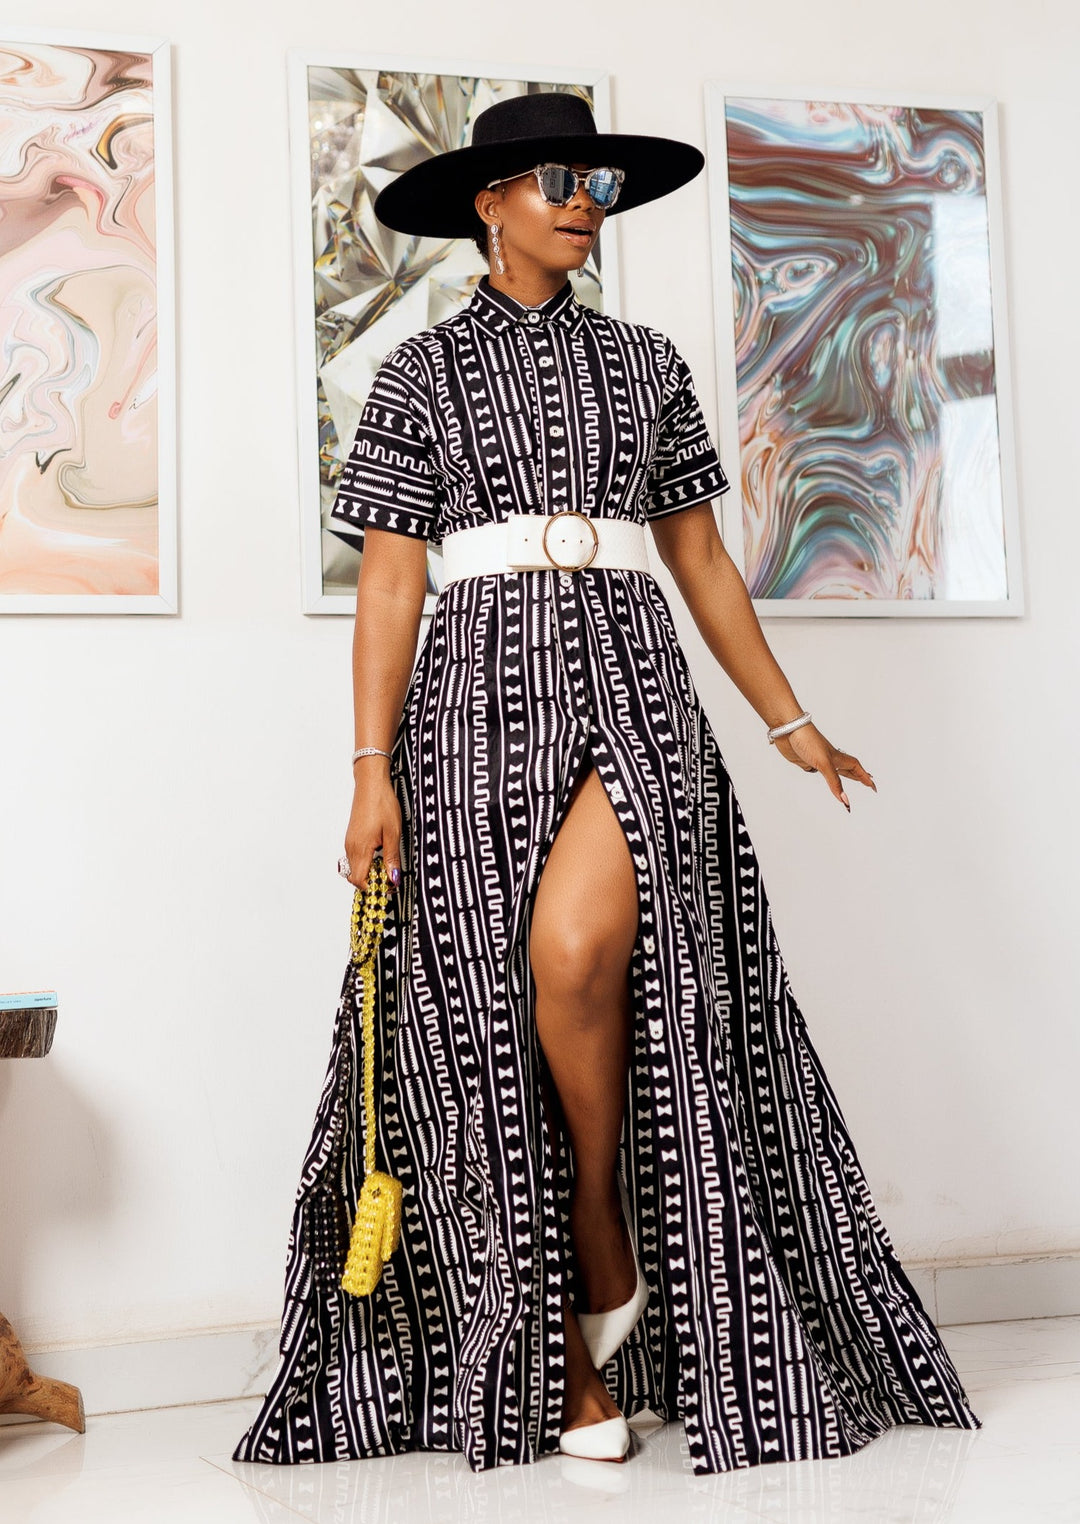 A woman posing in a black and white African print maxi kimono dress.